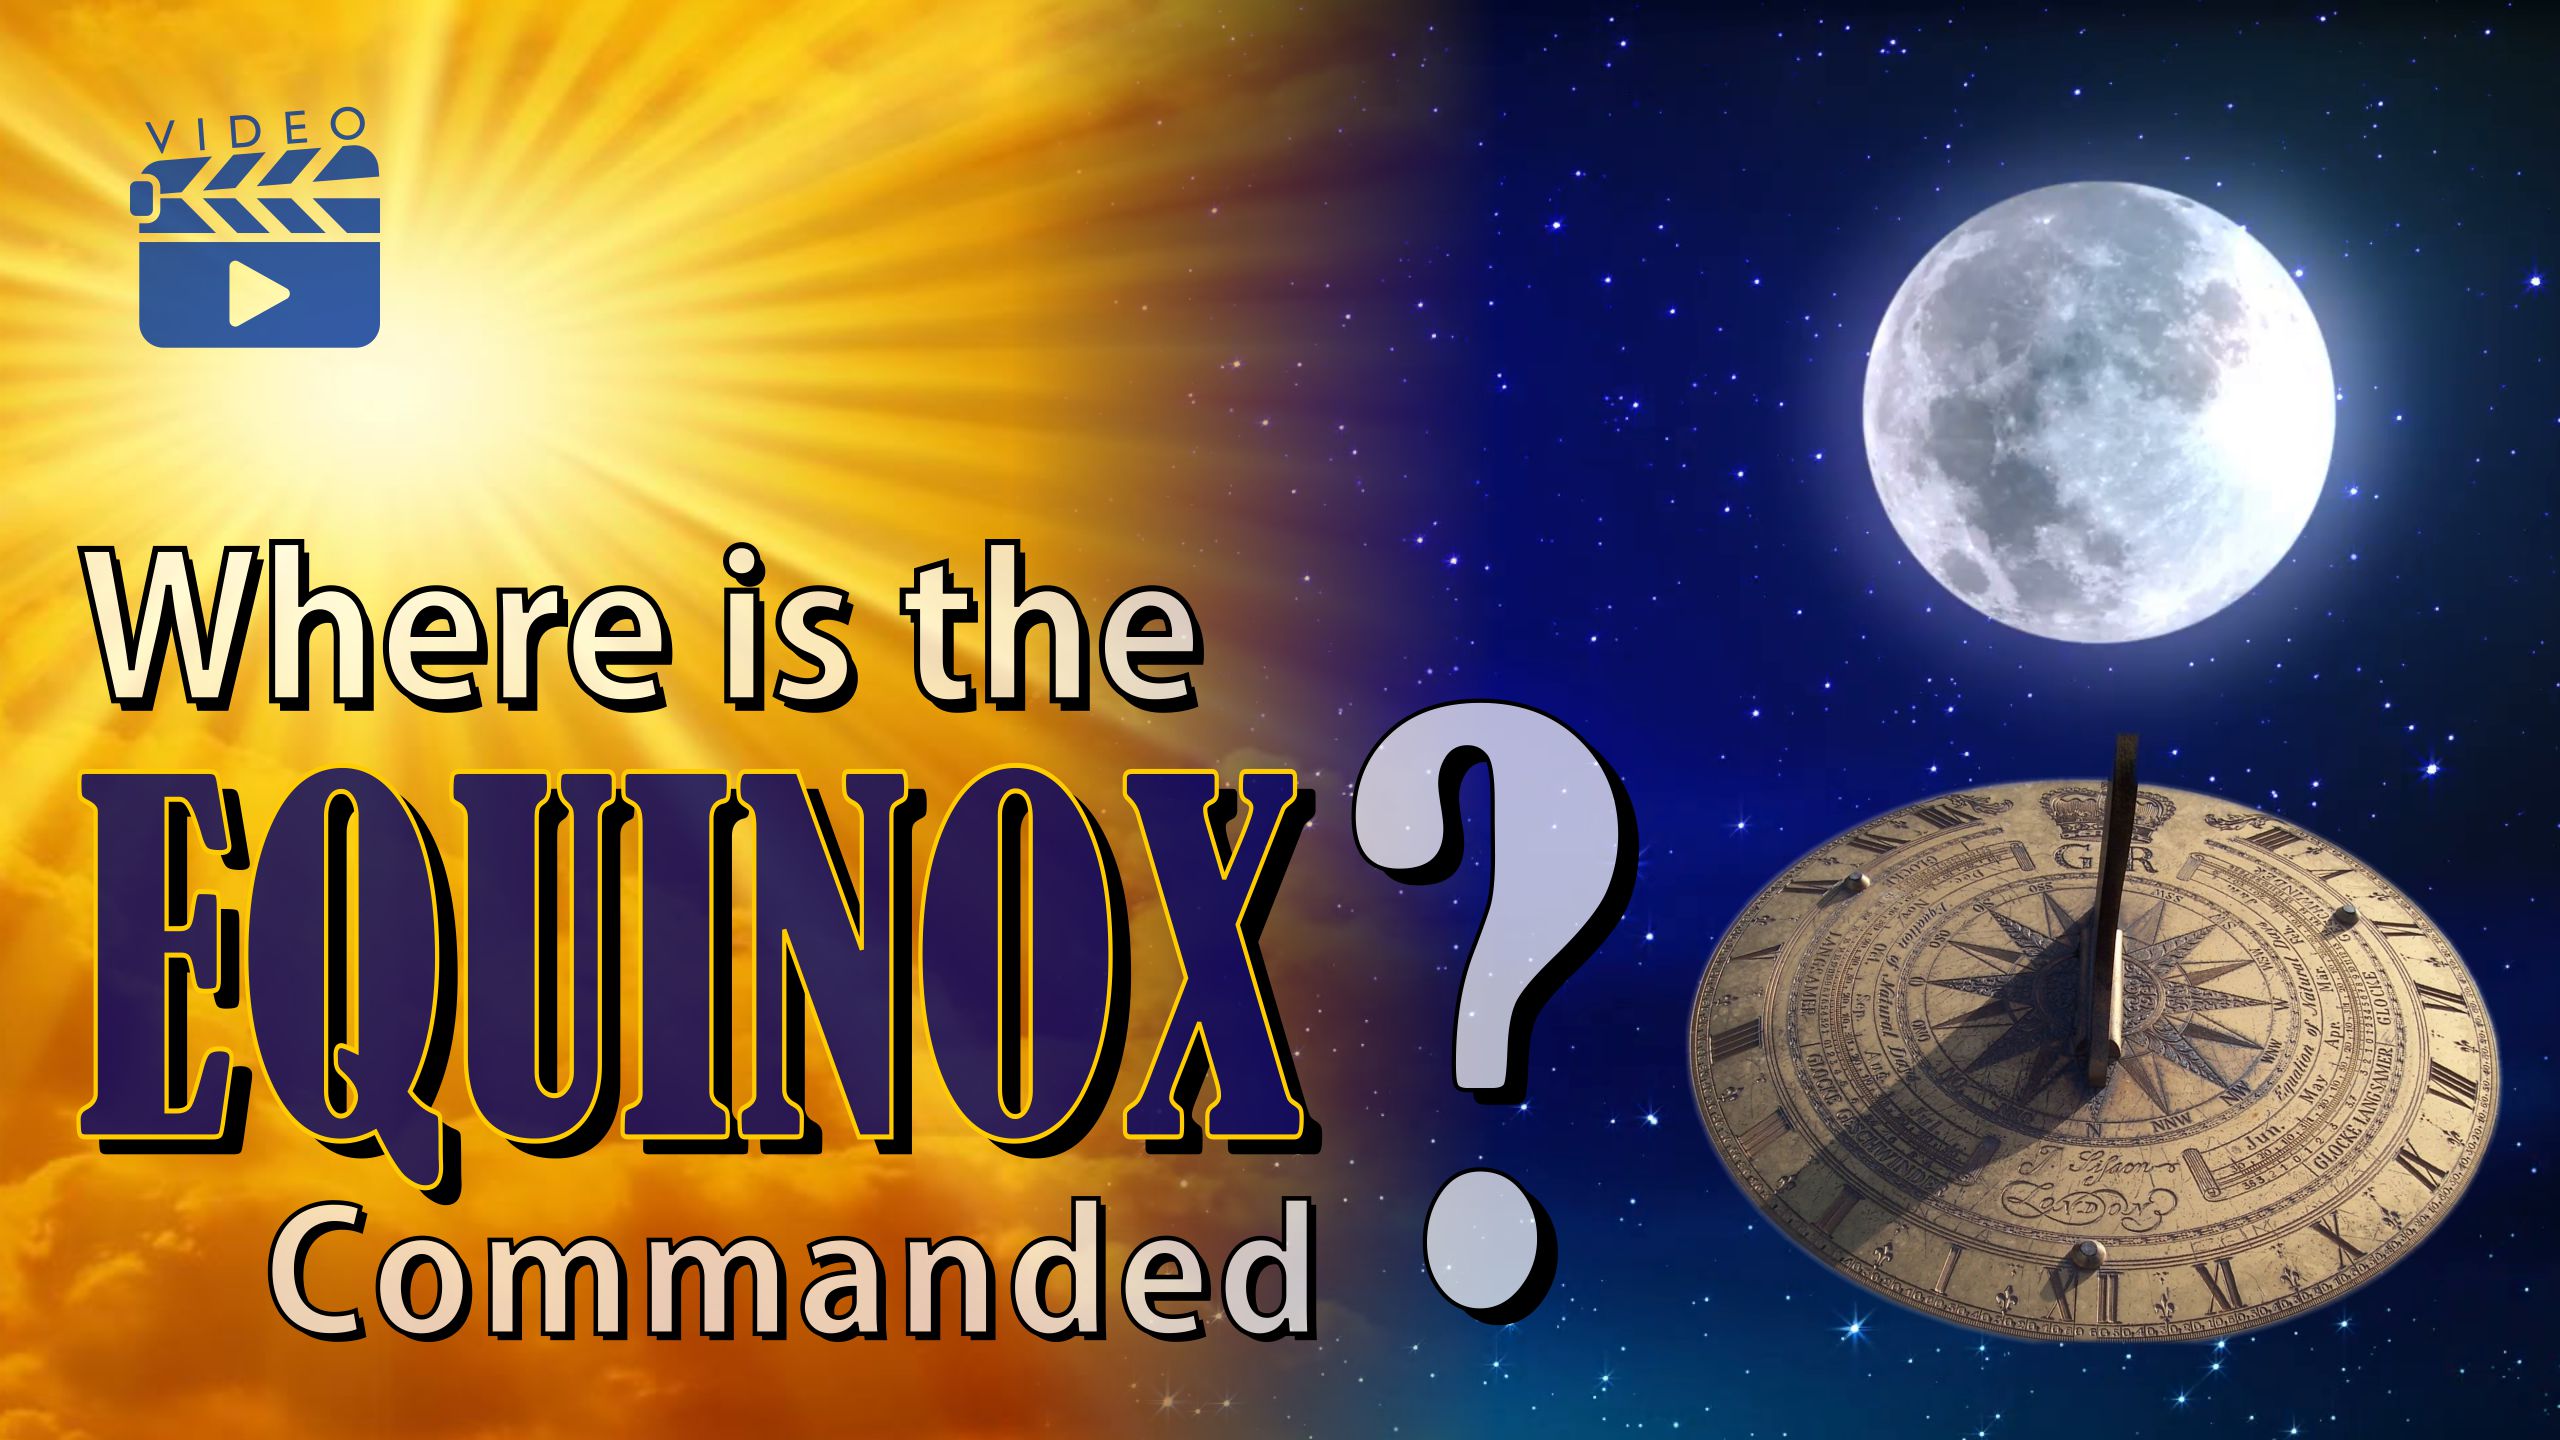 Where is the Equinox Commanded?